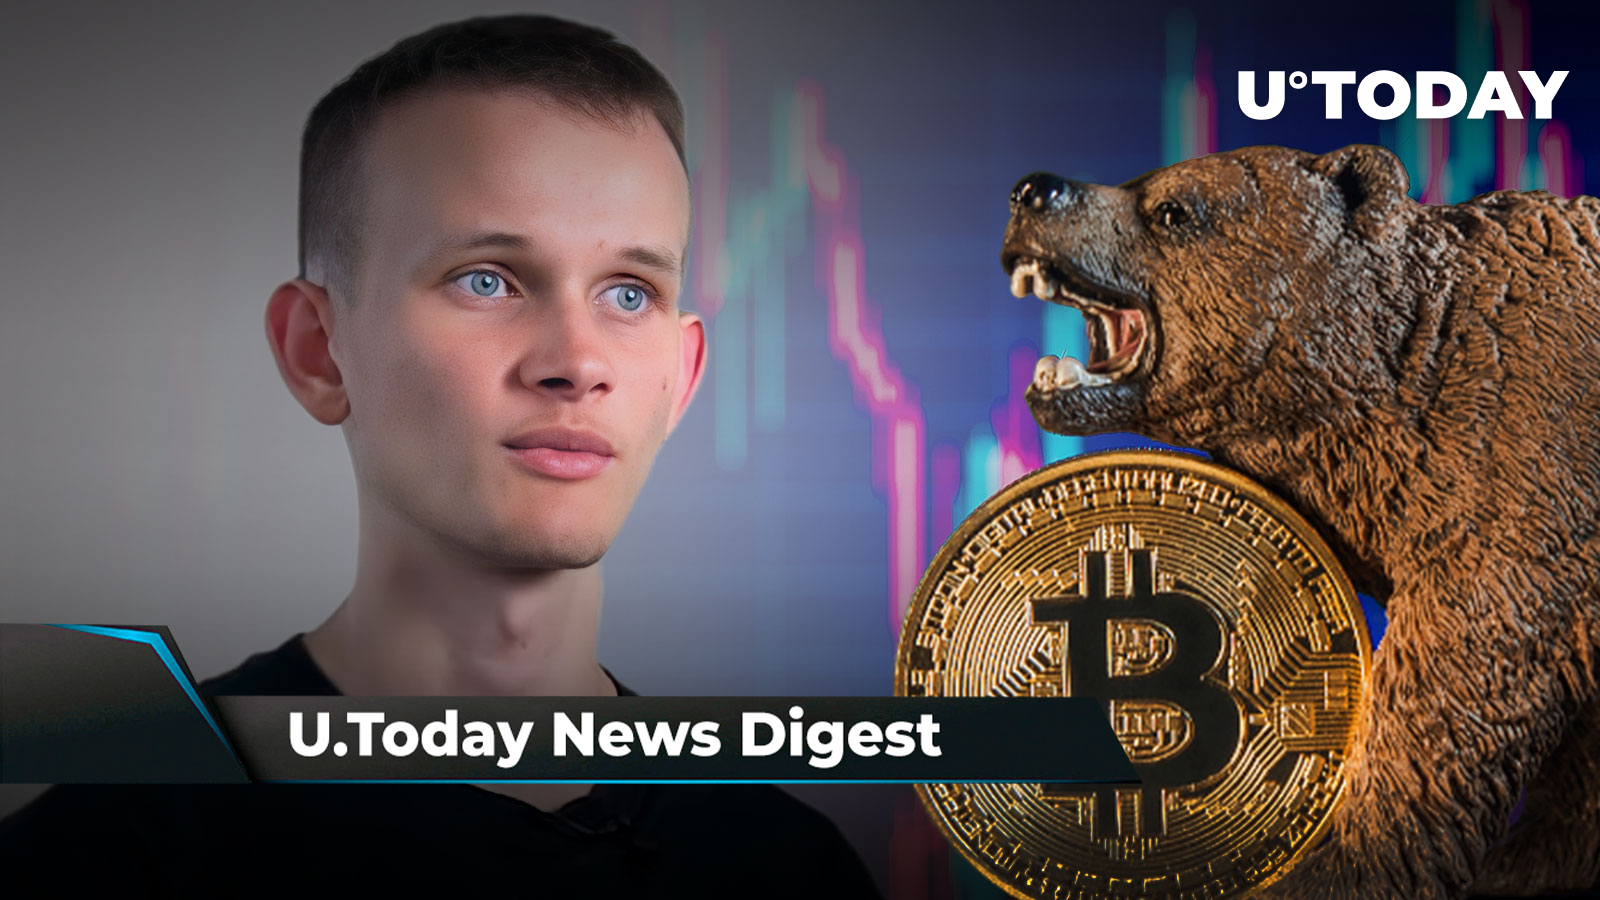 New Meme Token “Supported” by Vitalik Buterin, BabyDoge Surges on New Listing, Here’s Why This BTC Bear Market Is Different: Crypto News Digest by U.Today